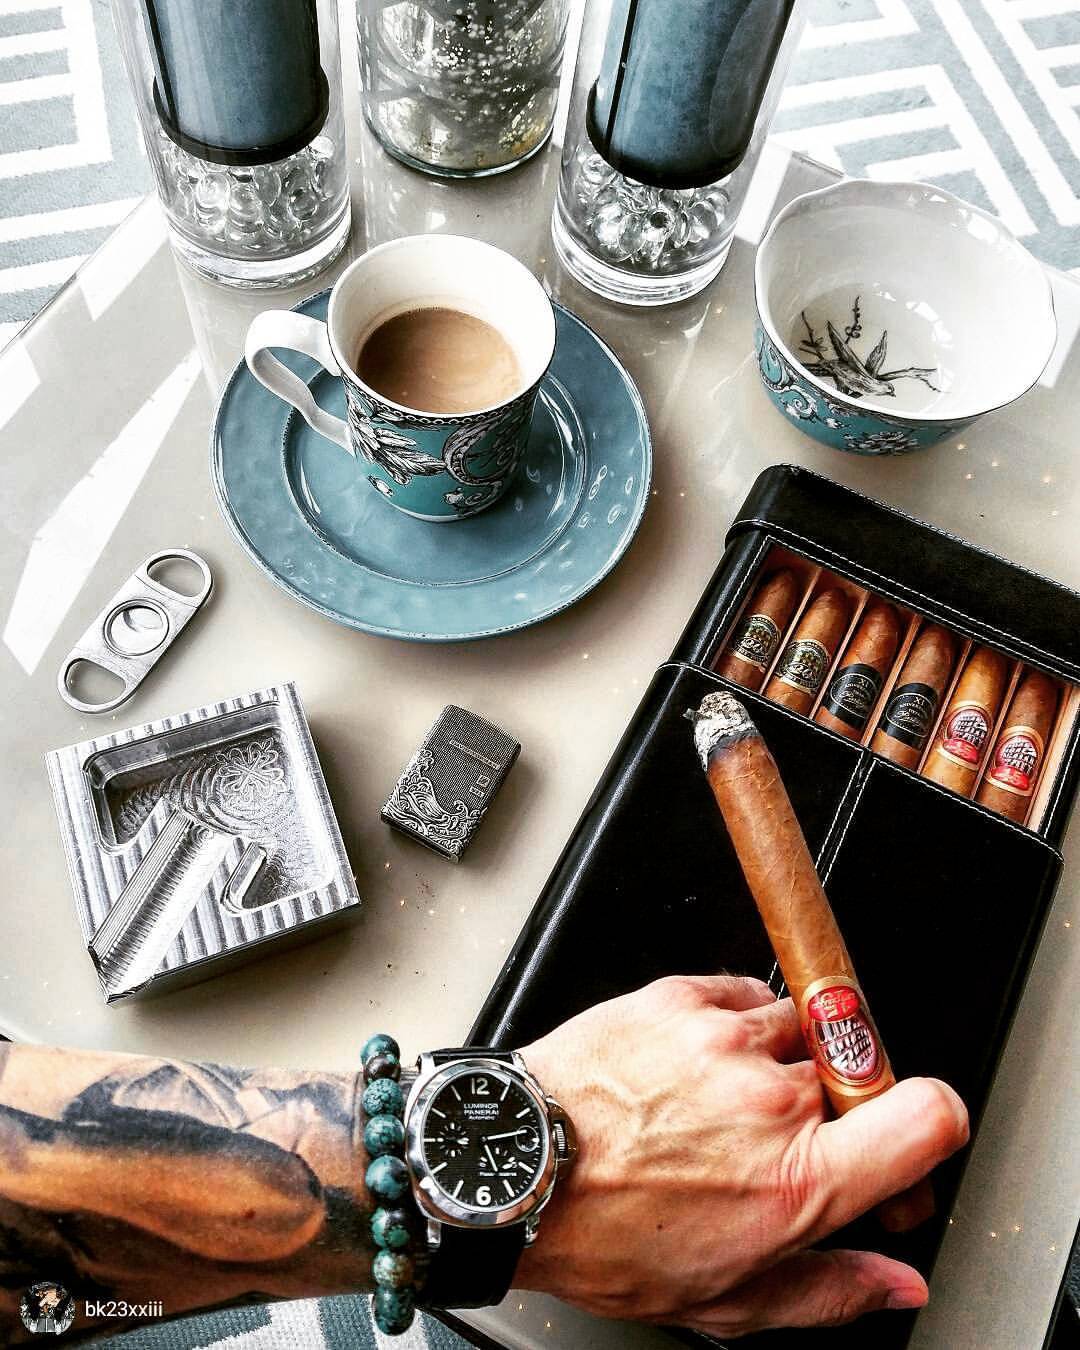 Rise and shine like my brother @bk23xxiii
🔥💨☕👌
#WhatWouldBk23xxiiiSmoke
#Repost 📸 from @bk23xxiii
WWW.CIGARSANDWHISKEYS.COM
➖➖➖➖➖➖➖➖
Tag someone who’d love this!😉
:Like 👍, Repost 🔃, Tag 🔖 Follow 👣 Us & Subscribe ✍...